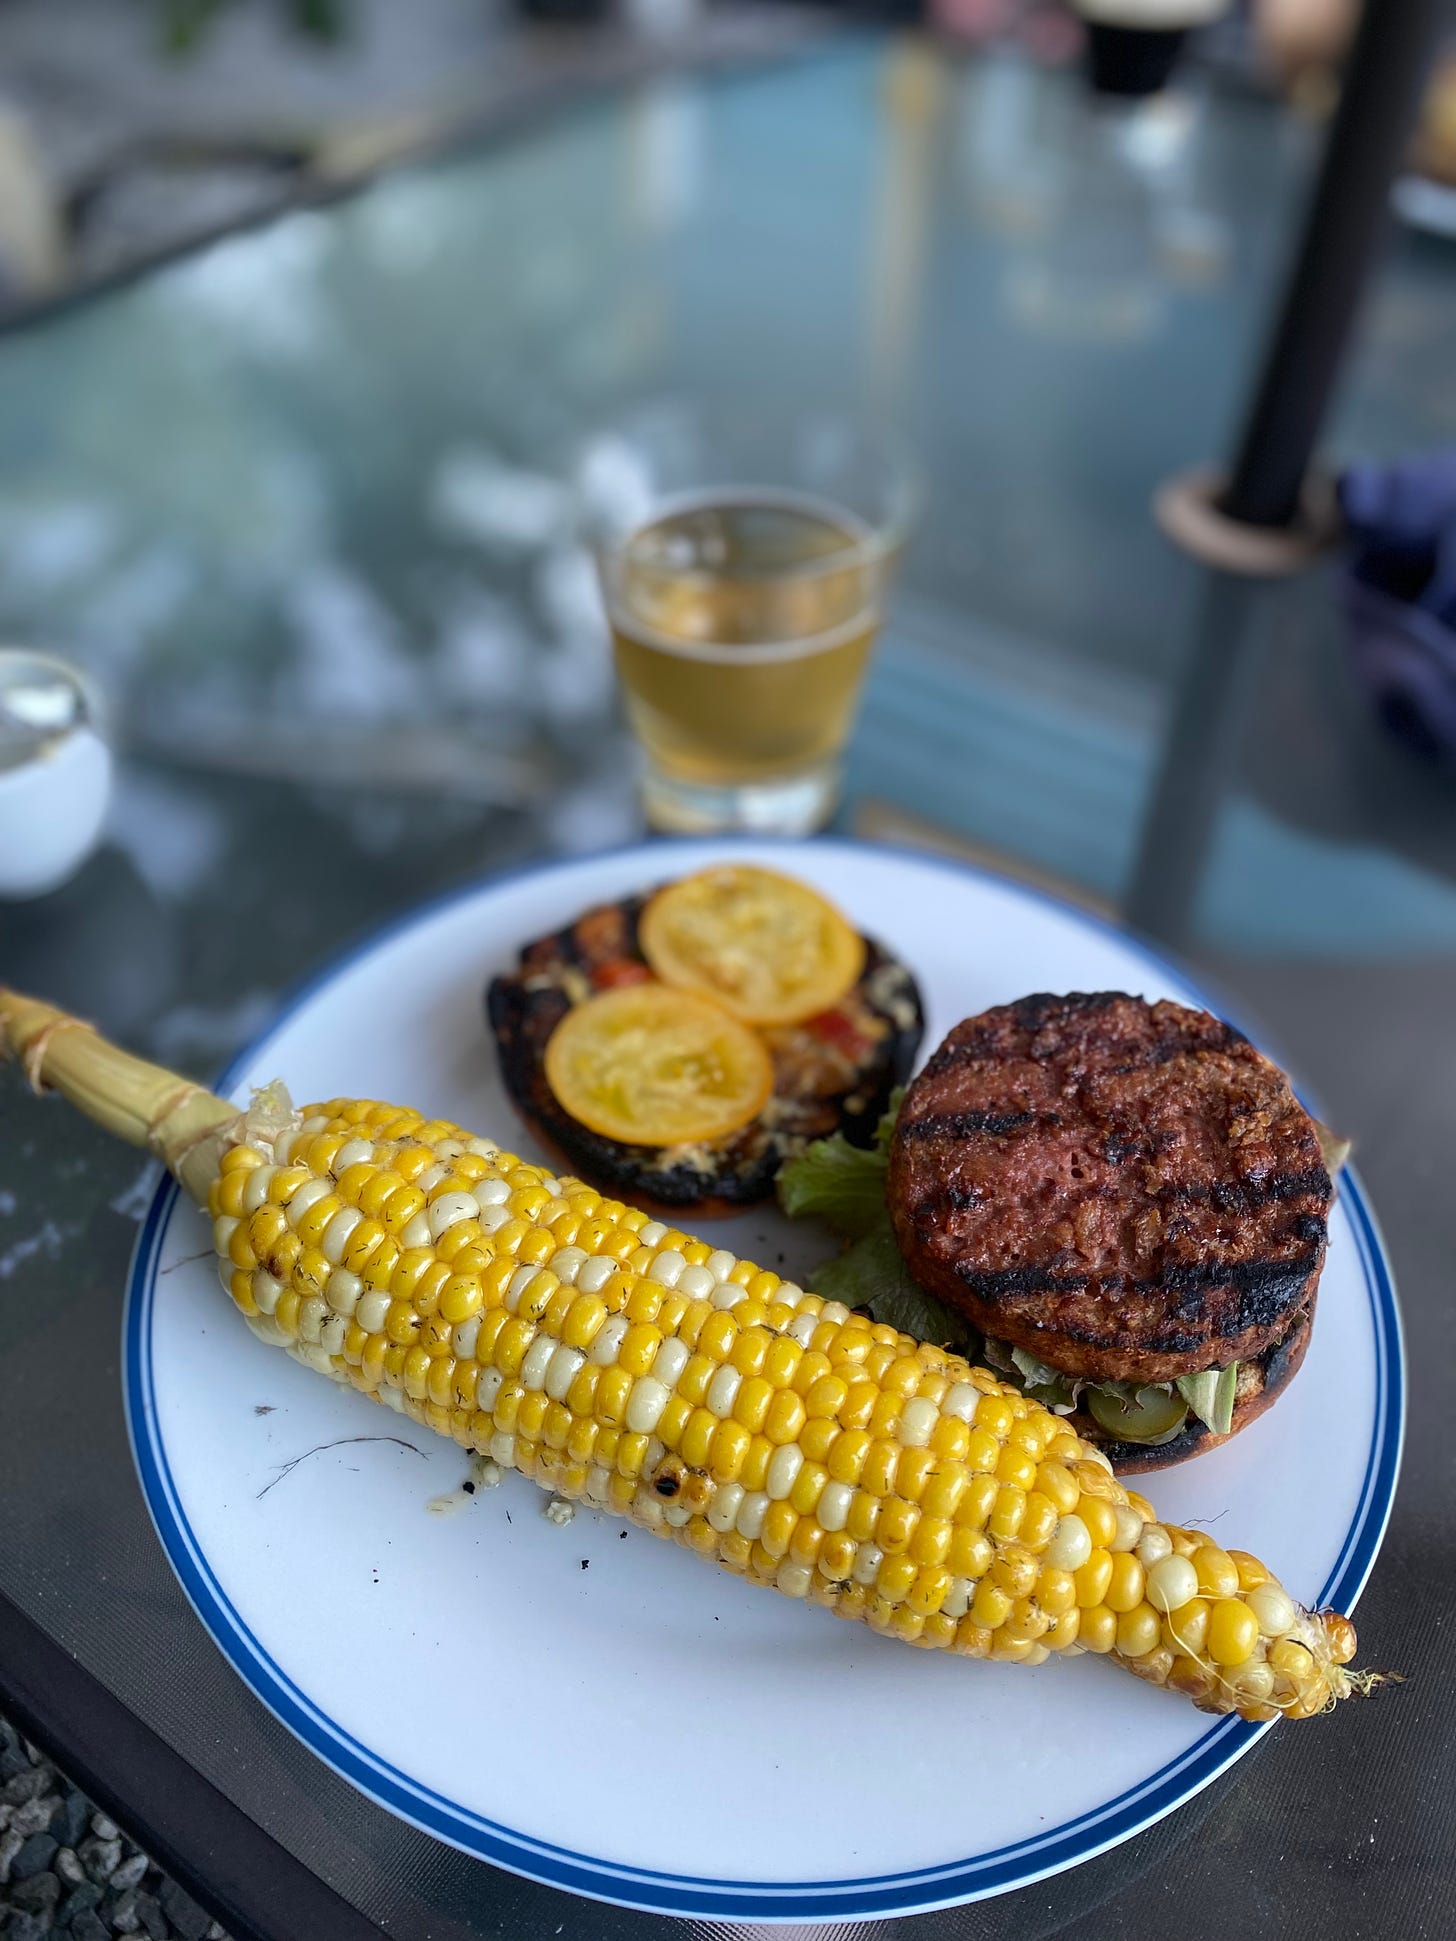 On a white plate, an ear of grilled corn with dill butter. Behind the corn is a burger on a grilled bun, still open to show a grilled Beyond patty on top of lettuce and pickle, the top half with two slices of yellow heirloom tomato. Behind the plate is a partially empty glass of light beer.